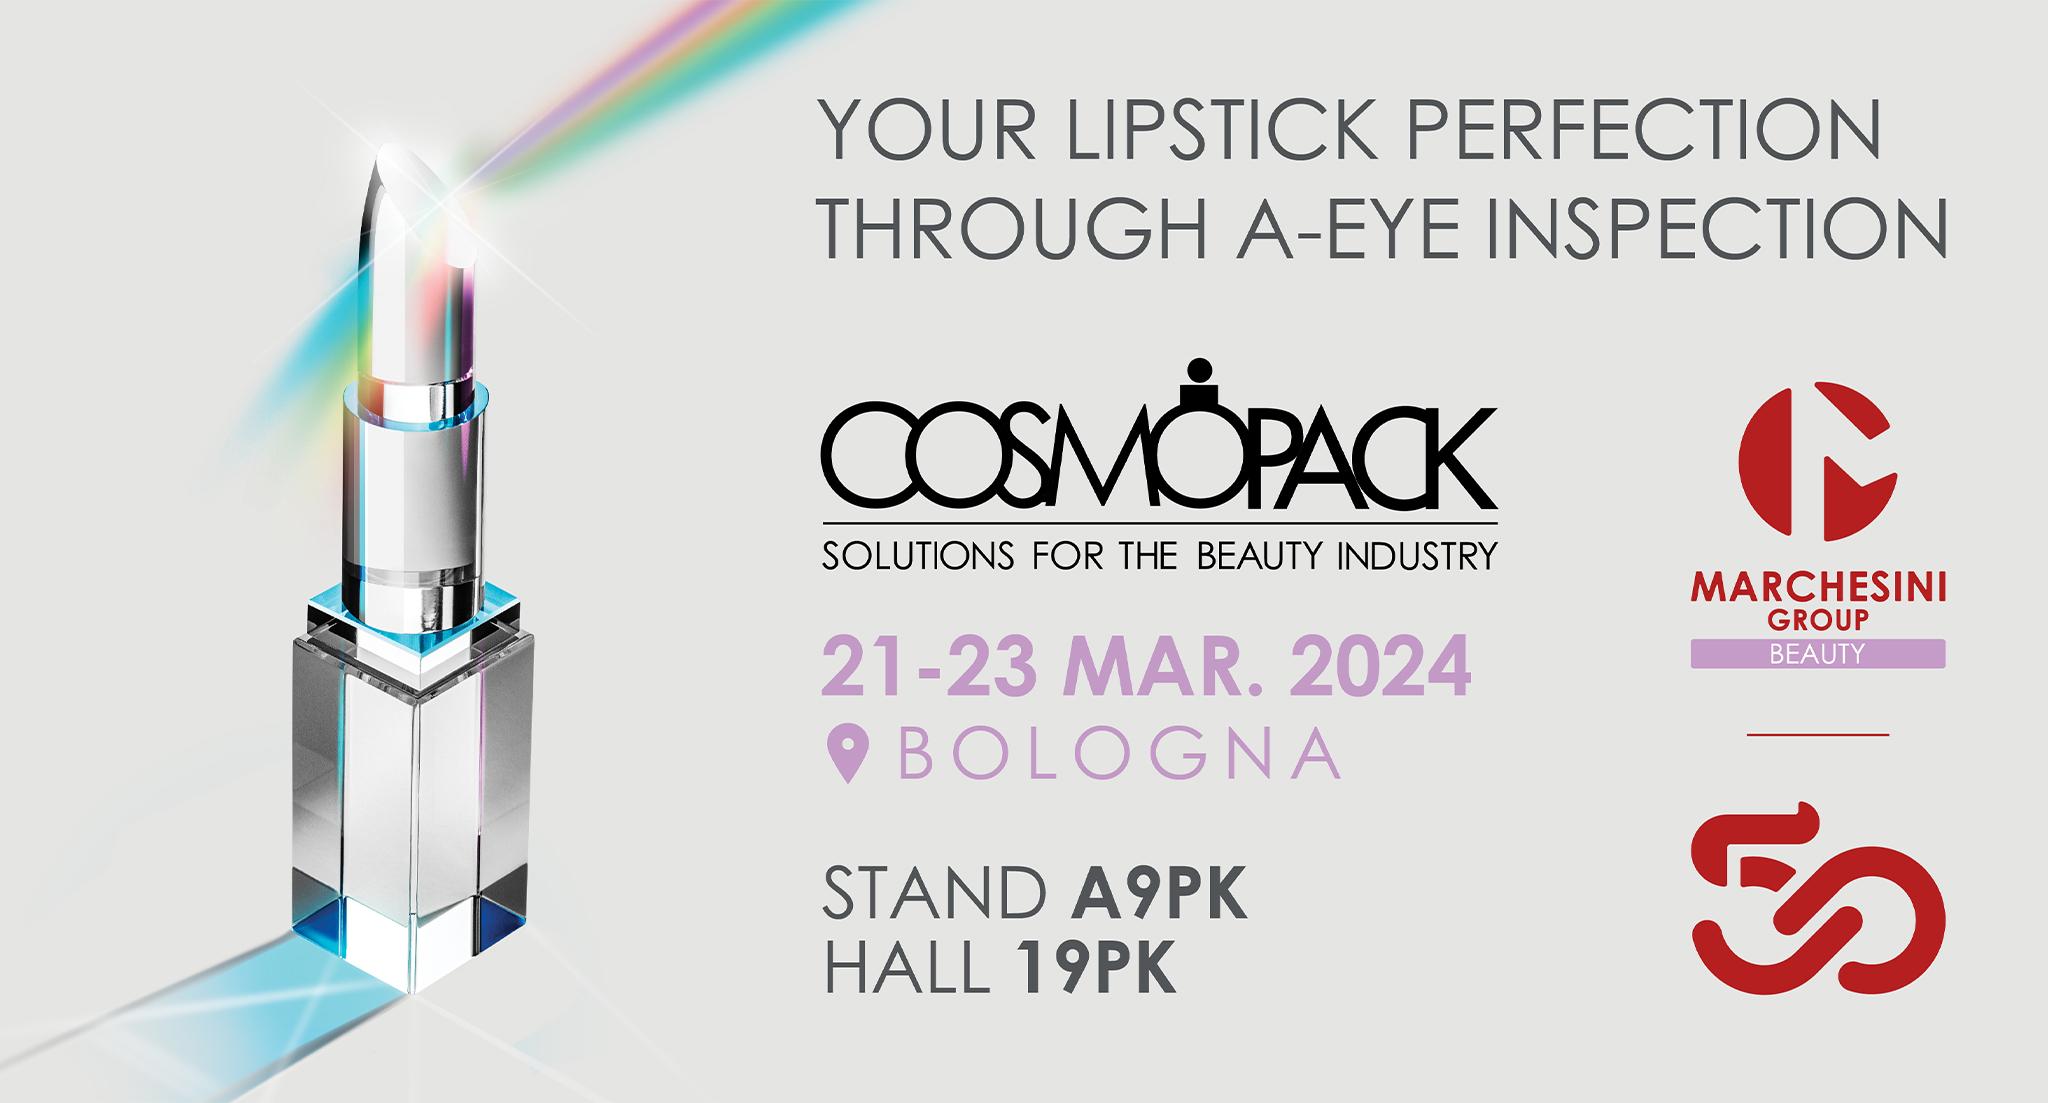 Marchesini Group Beauty at Cosmopack 2024